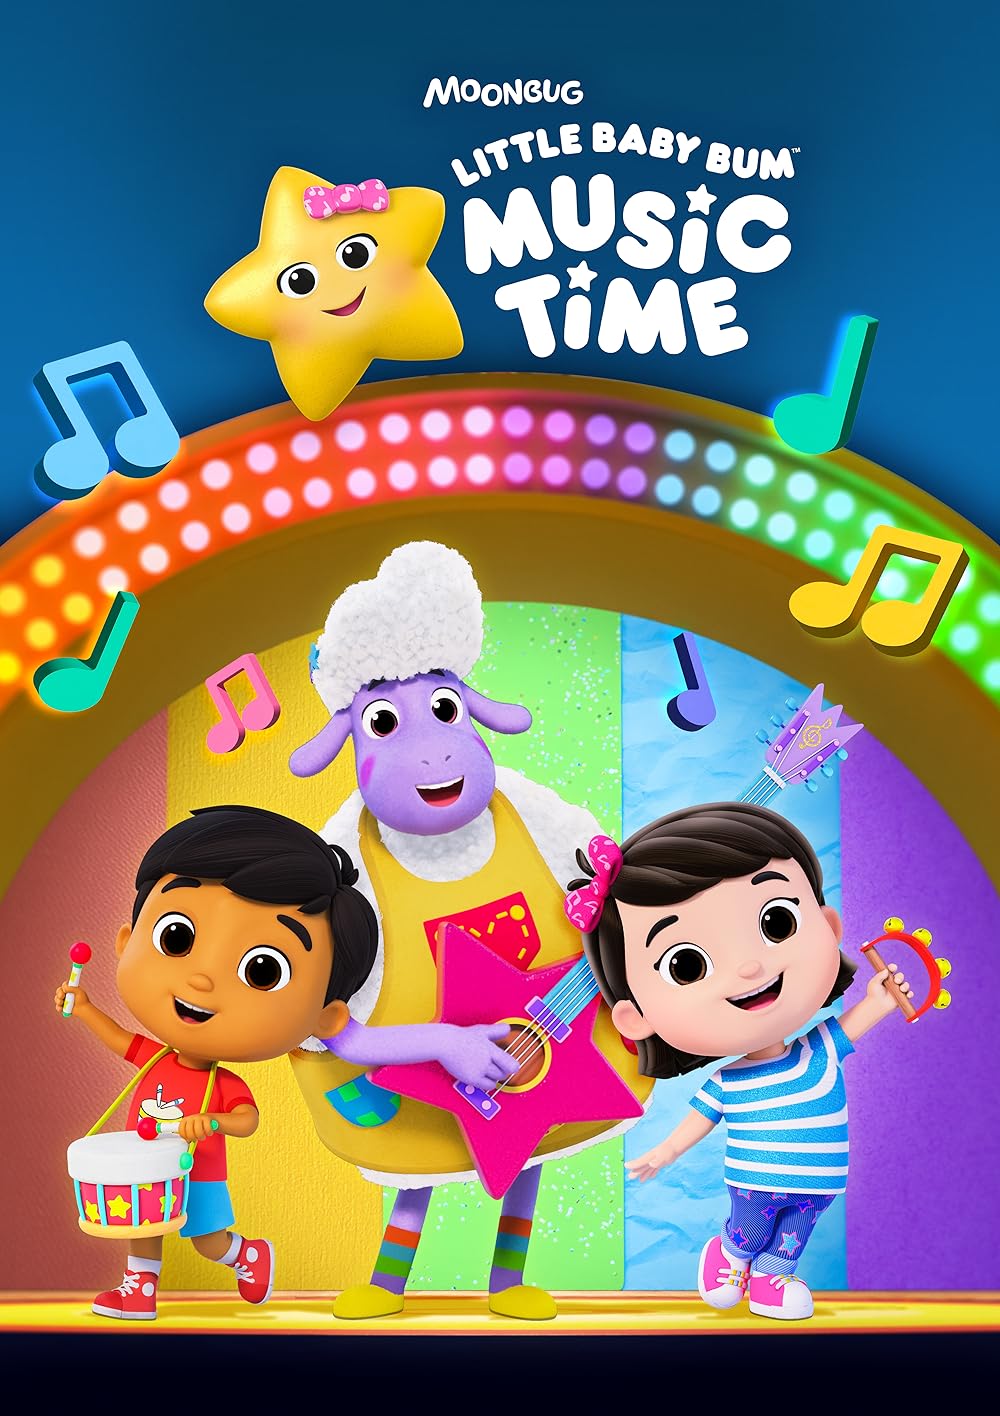 Little Baby Bum: Music Time